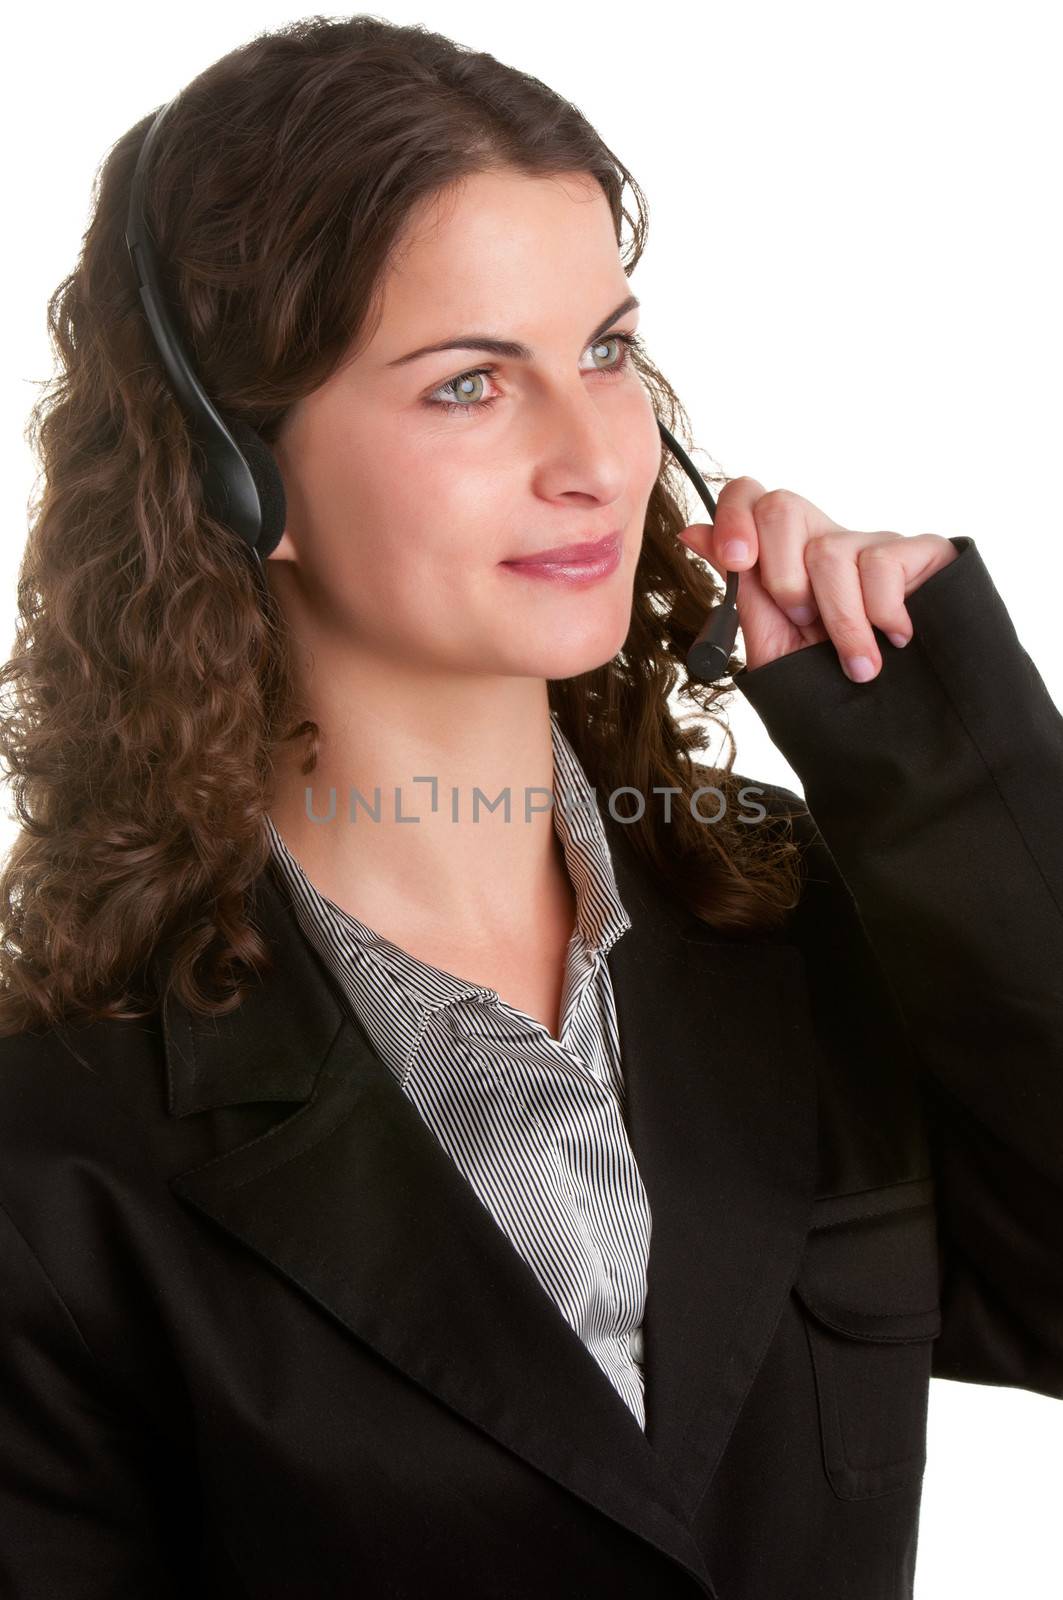 Corporate woman talking over her headset, isolated in a white background